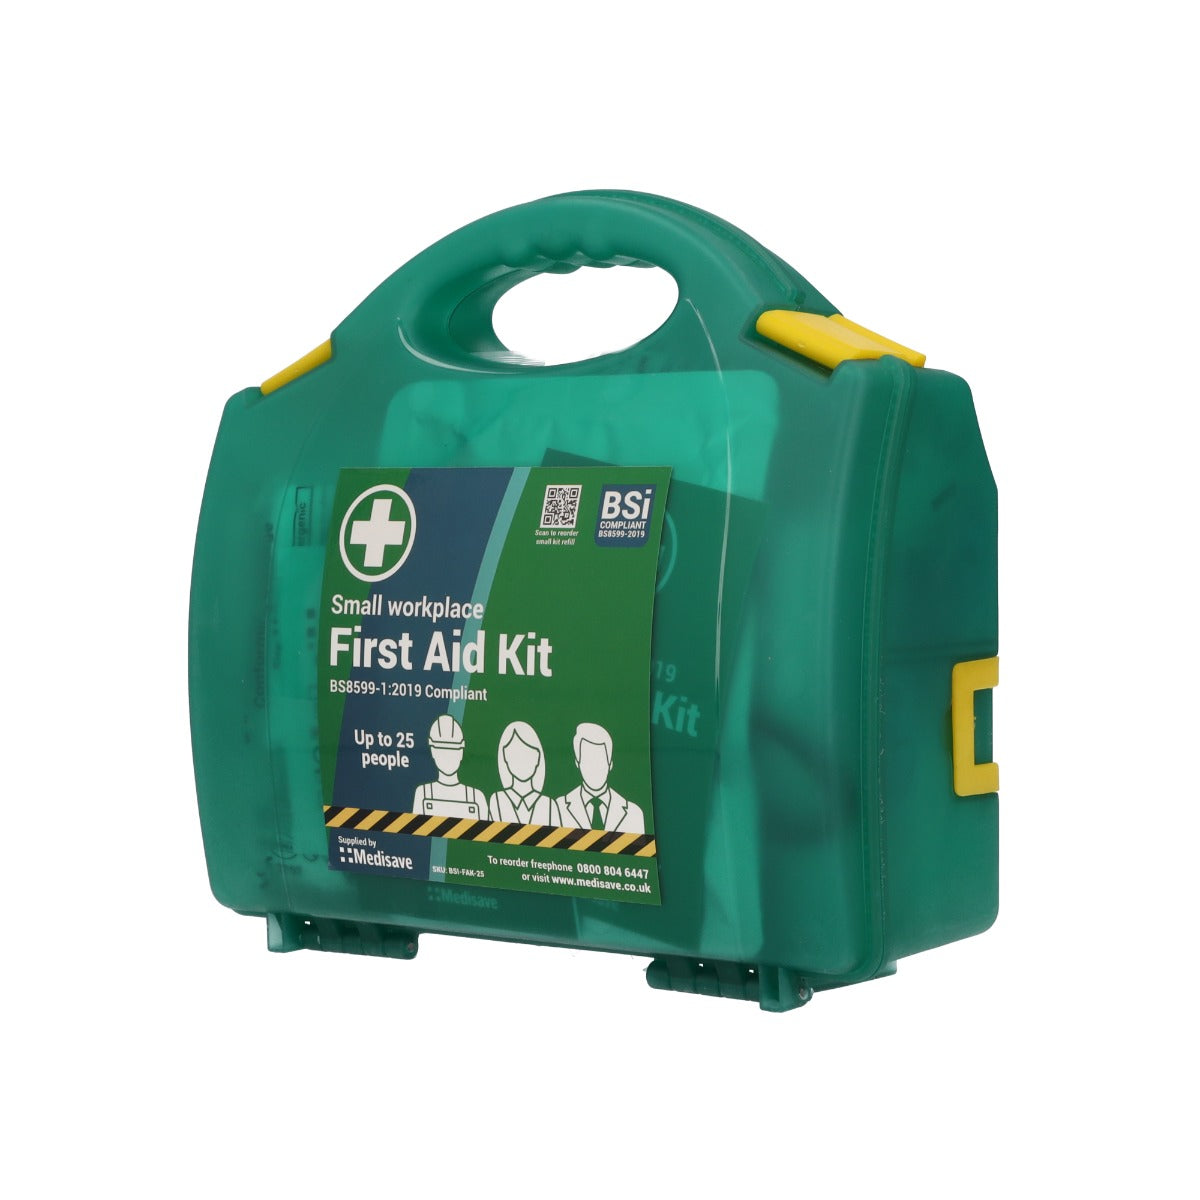 Workplace First Aid Kit - BS8599-1:2019 - Small